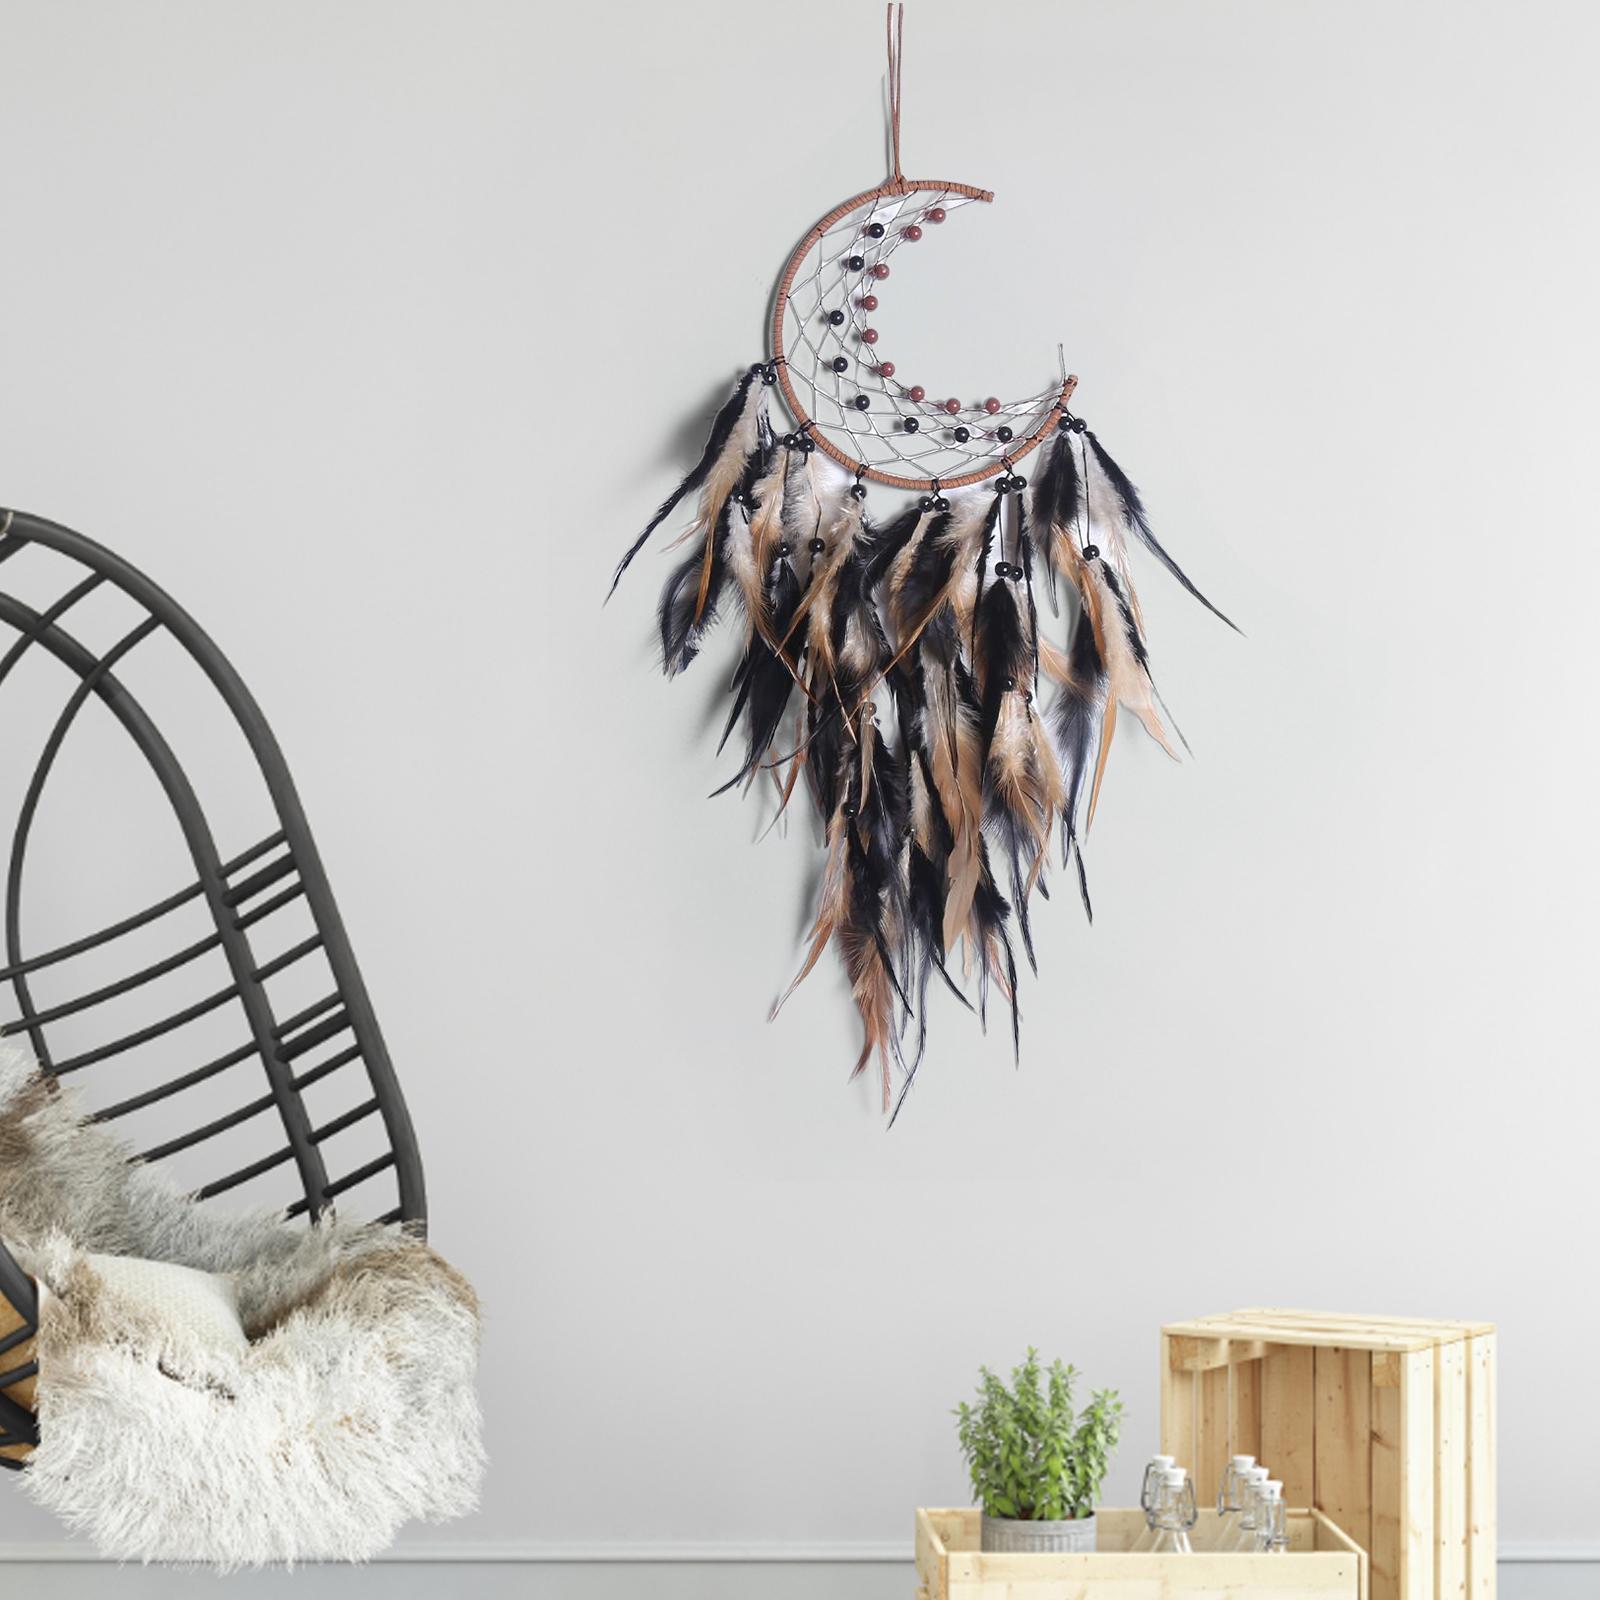 Boho Macrame Wall Hanging Handmade Braided Wall Decor Pendant for Party Home Decoration